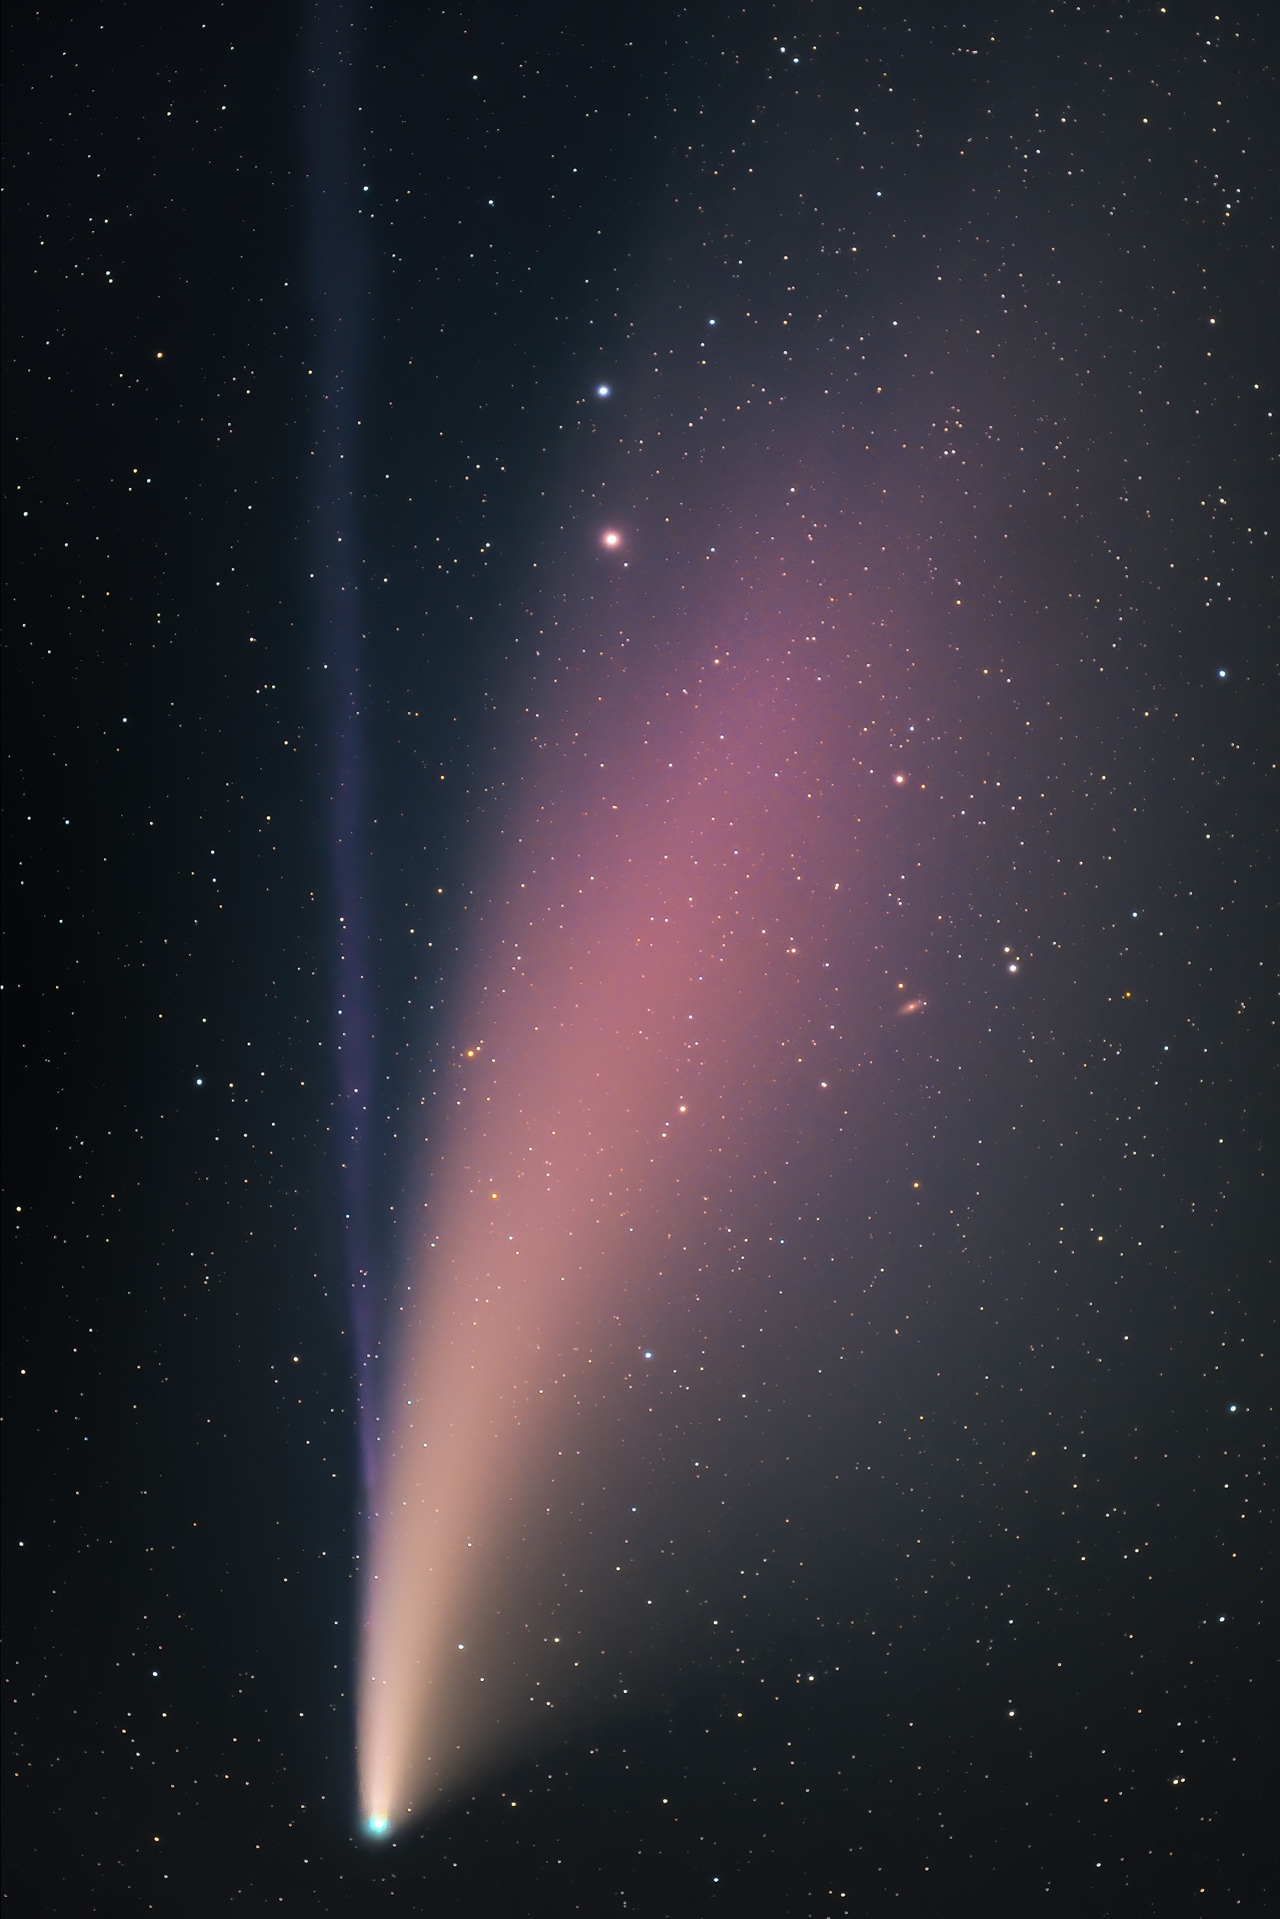 Comet Neowise